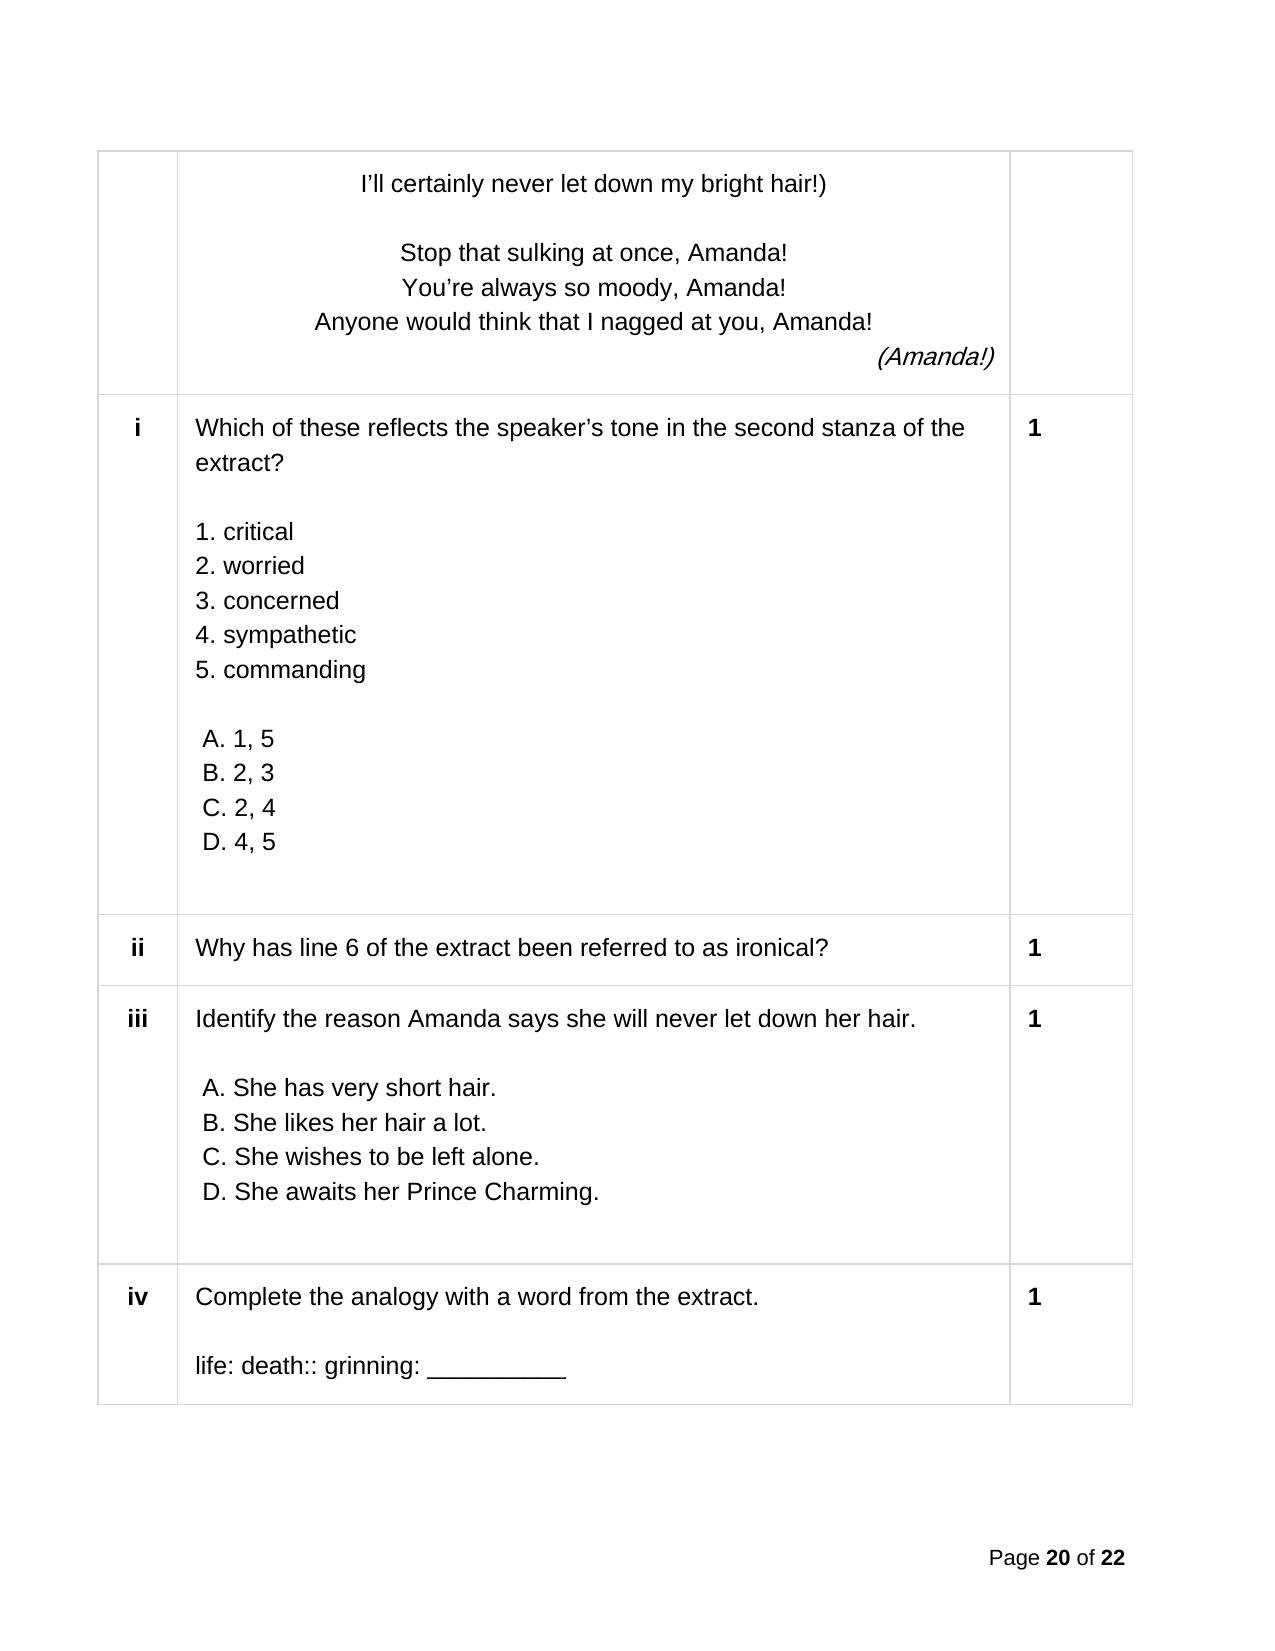 CBSE Class 10 English Practice Questions 2022-23 - Page 20